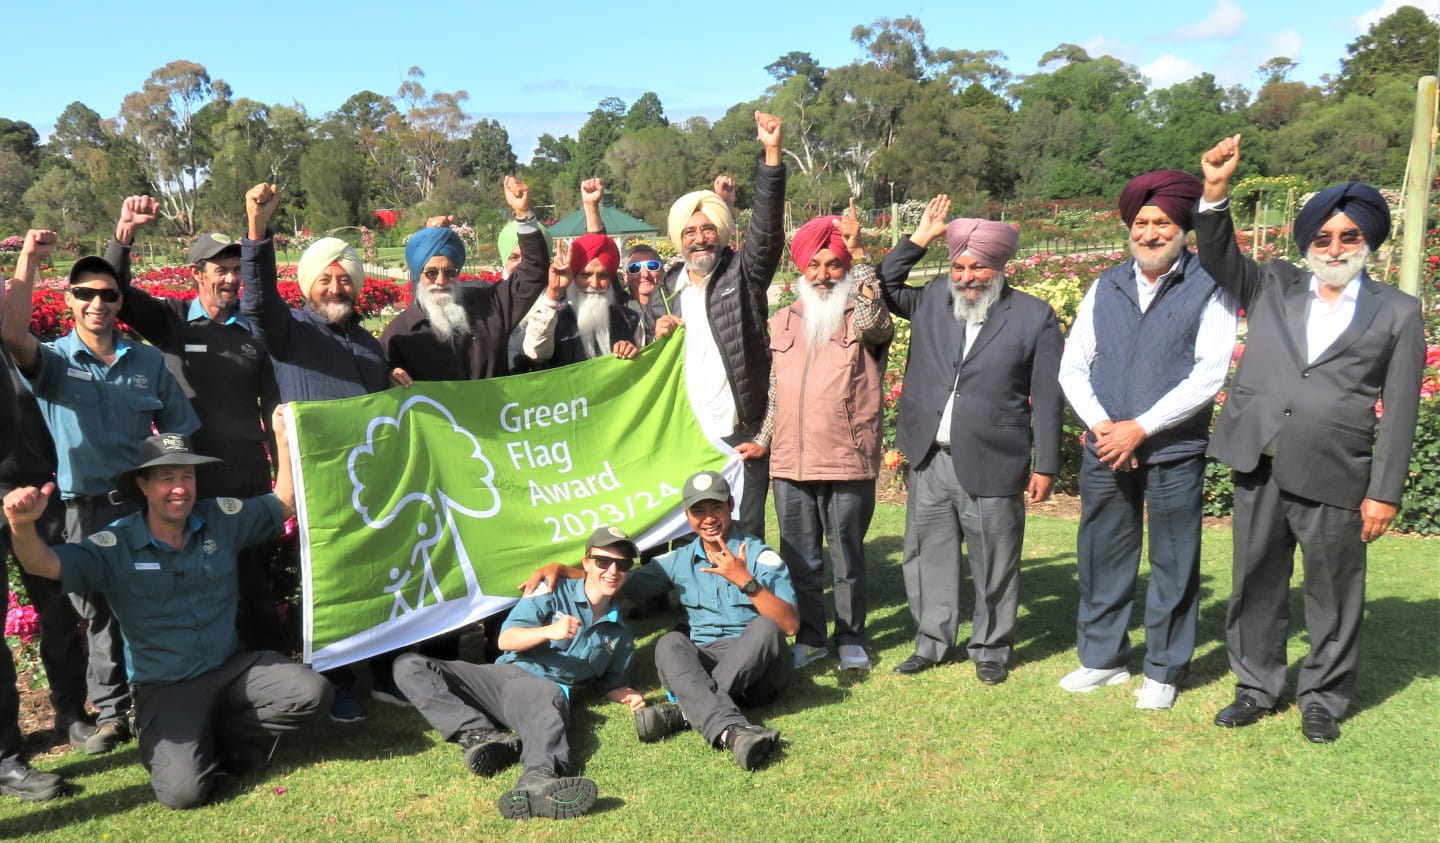 Members of the Harmony Club celebrate Werribee Park's Green Flag Award with Parks Victoria staff.